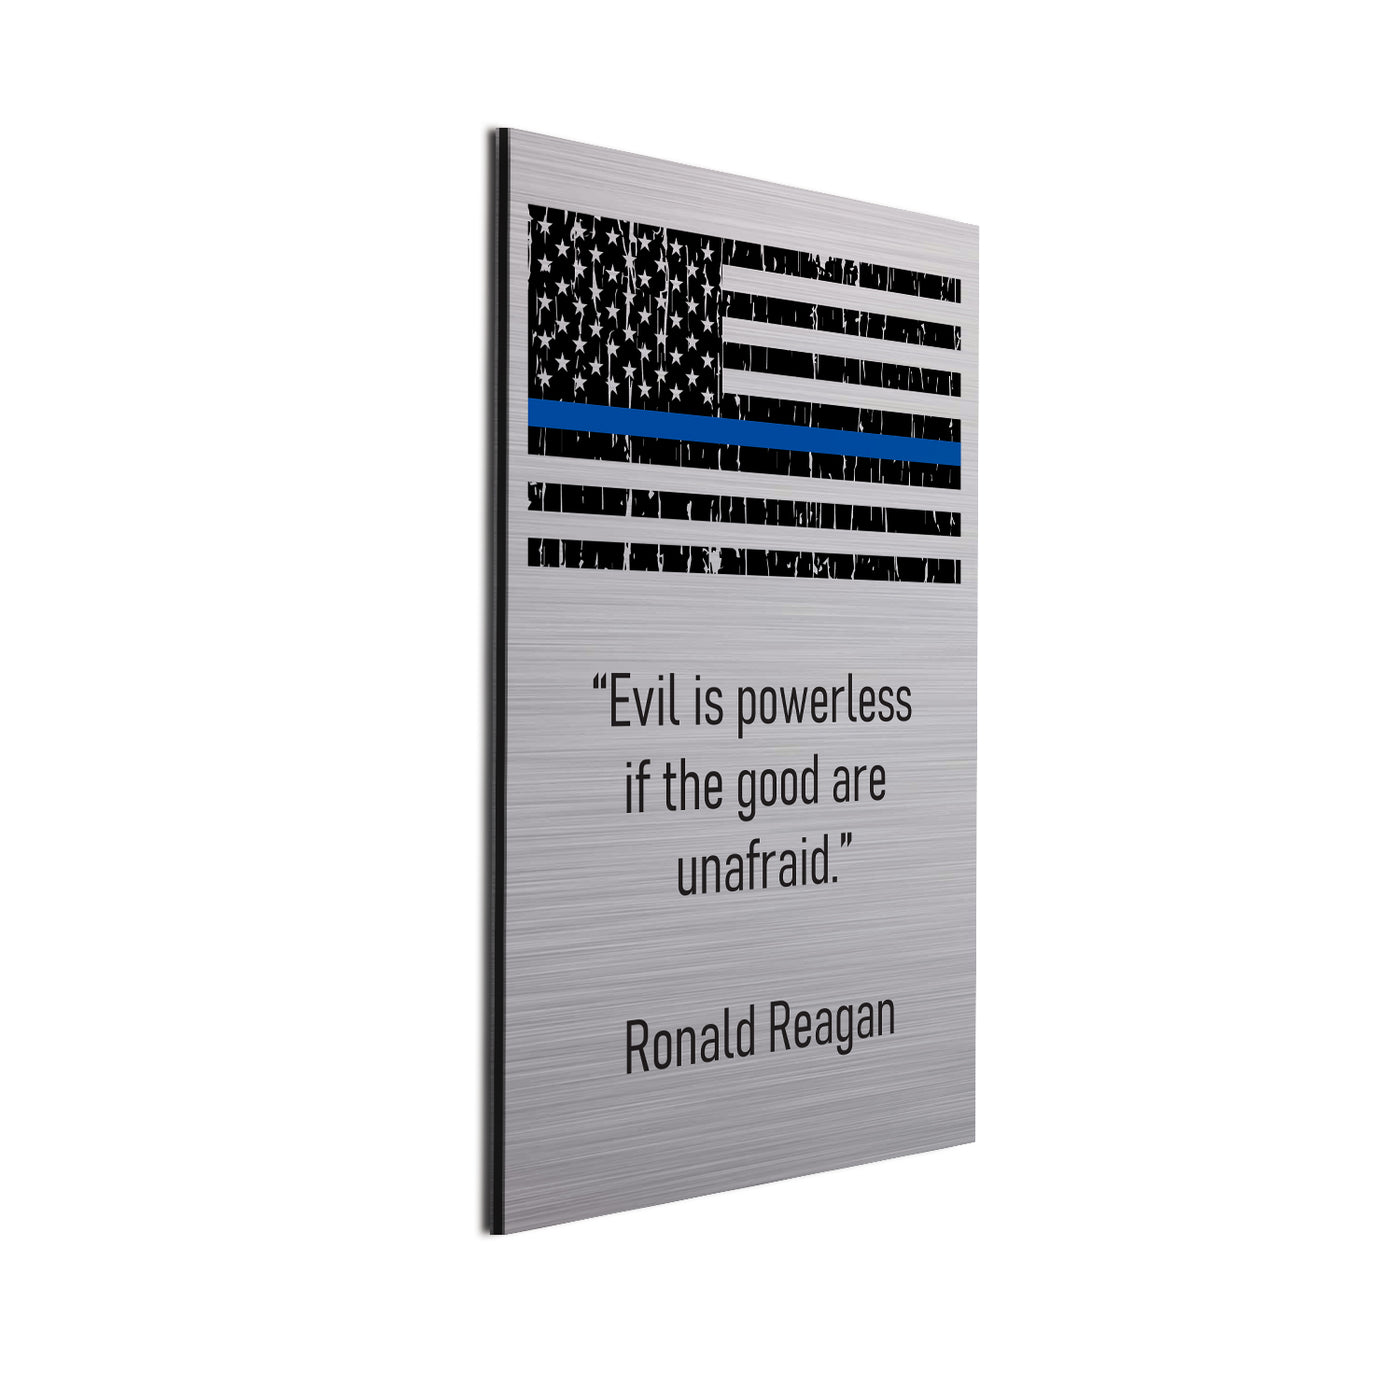 "Evil is powerless if the good are unafraid" Ronald Reagan quote with blue stripe on a brushed finish.